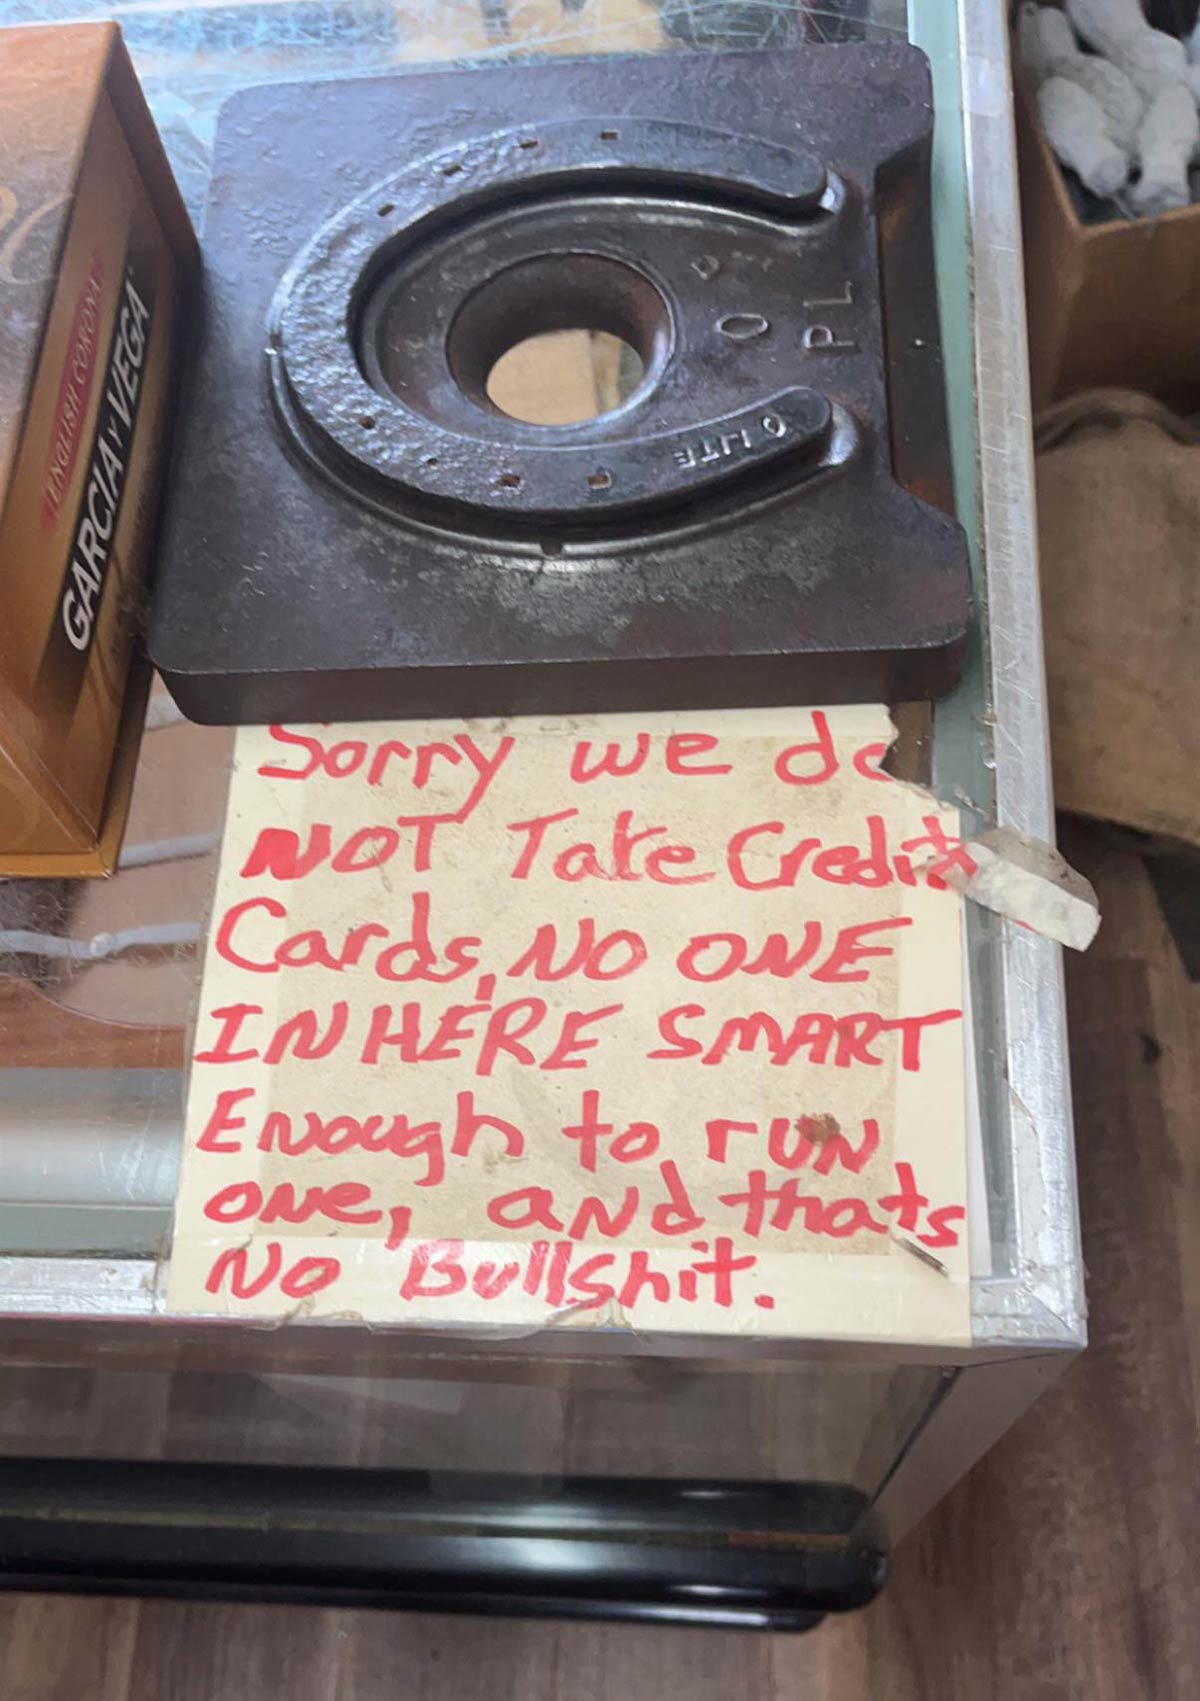 At an antique store in Missouri